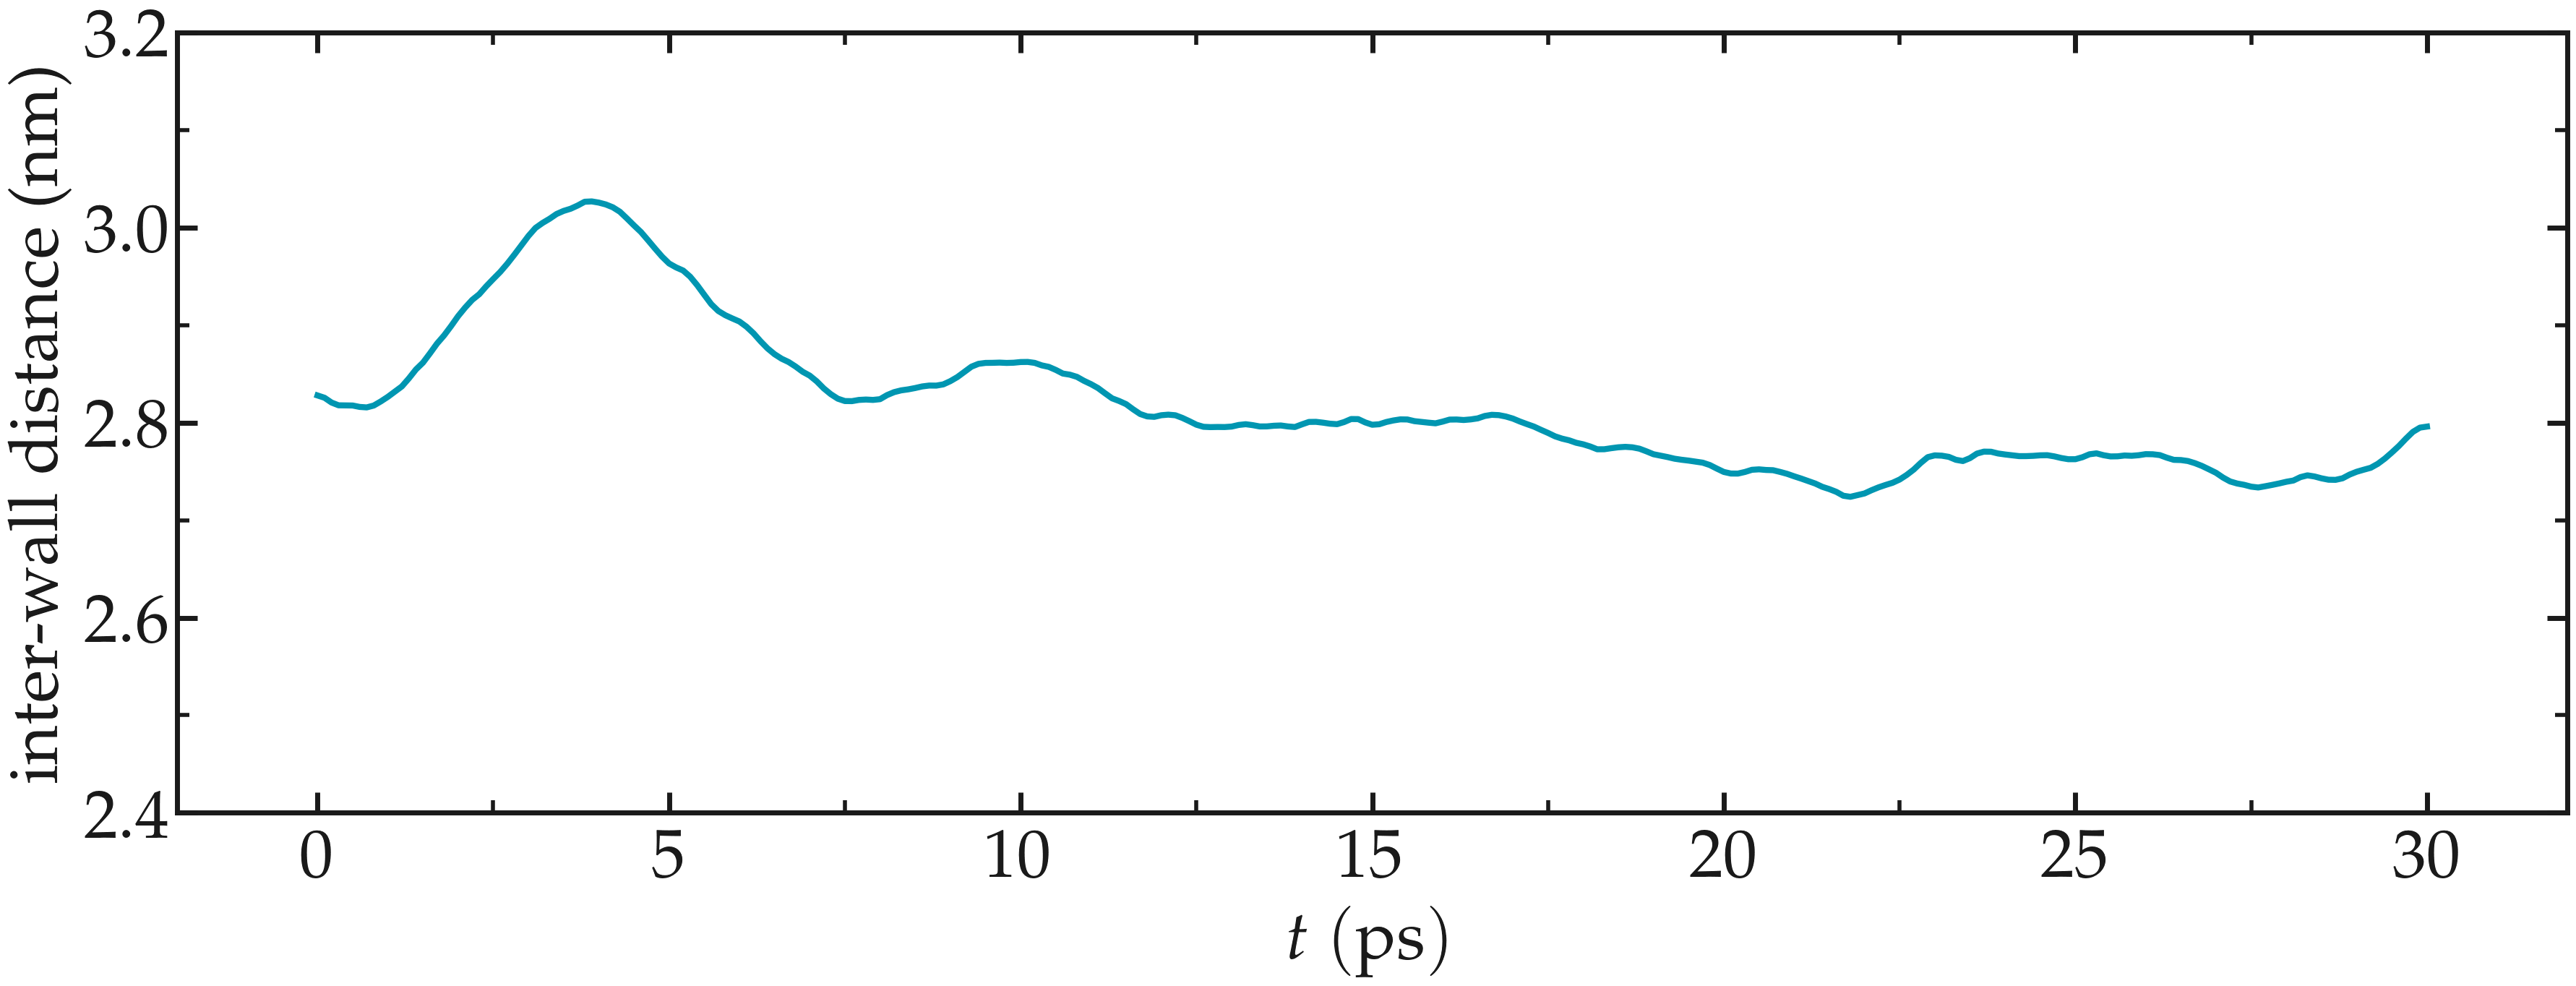 Plot showing the distance between the walls as a function of time.